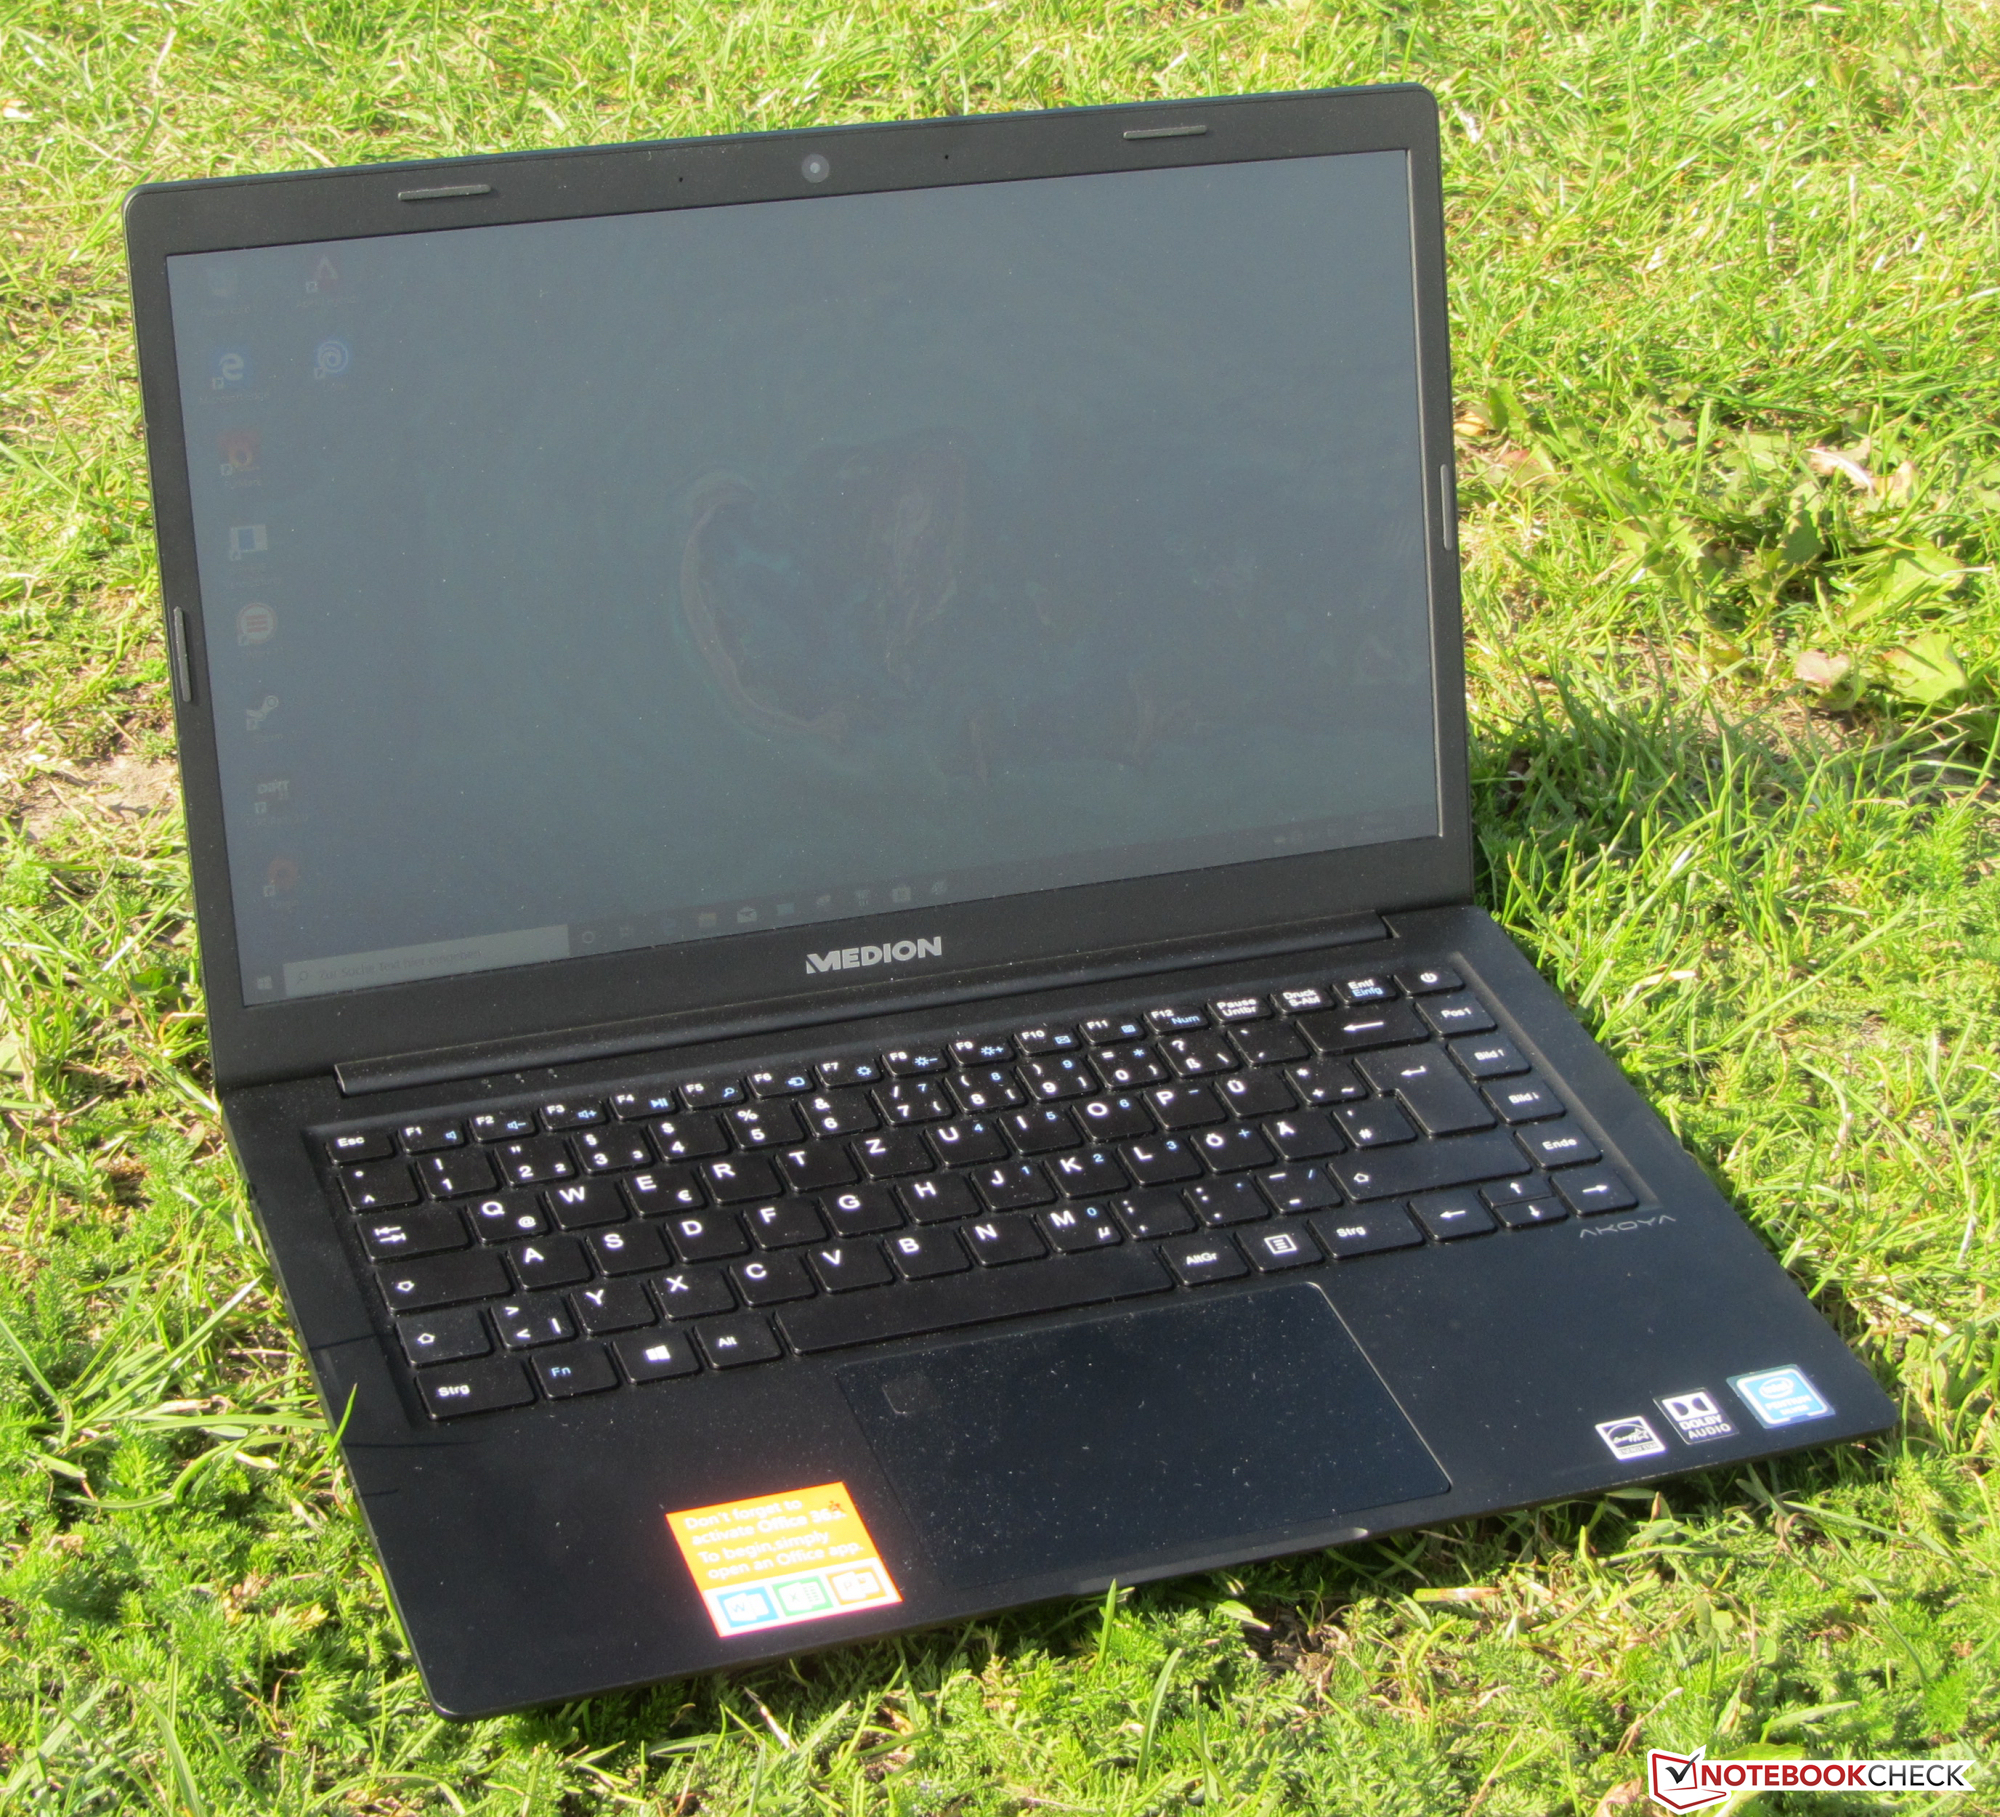 Medion Akoya E4253 Laptop Review: Long Runtime for a Small Amount Money - NotebookCheck.net Reviews